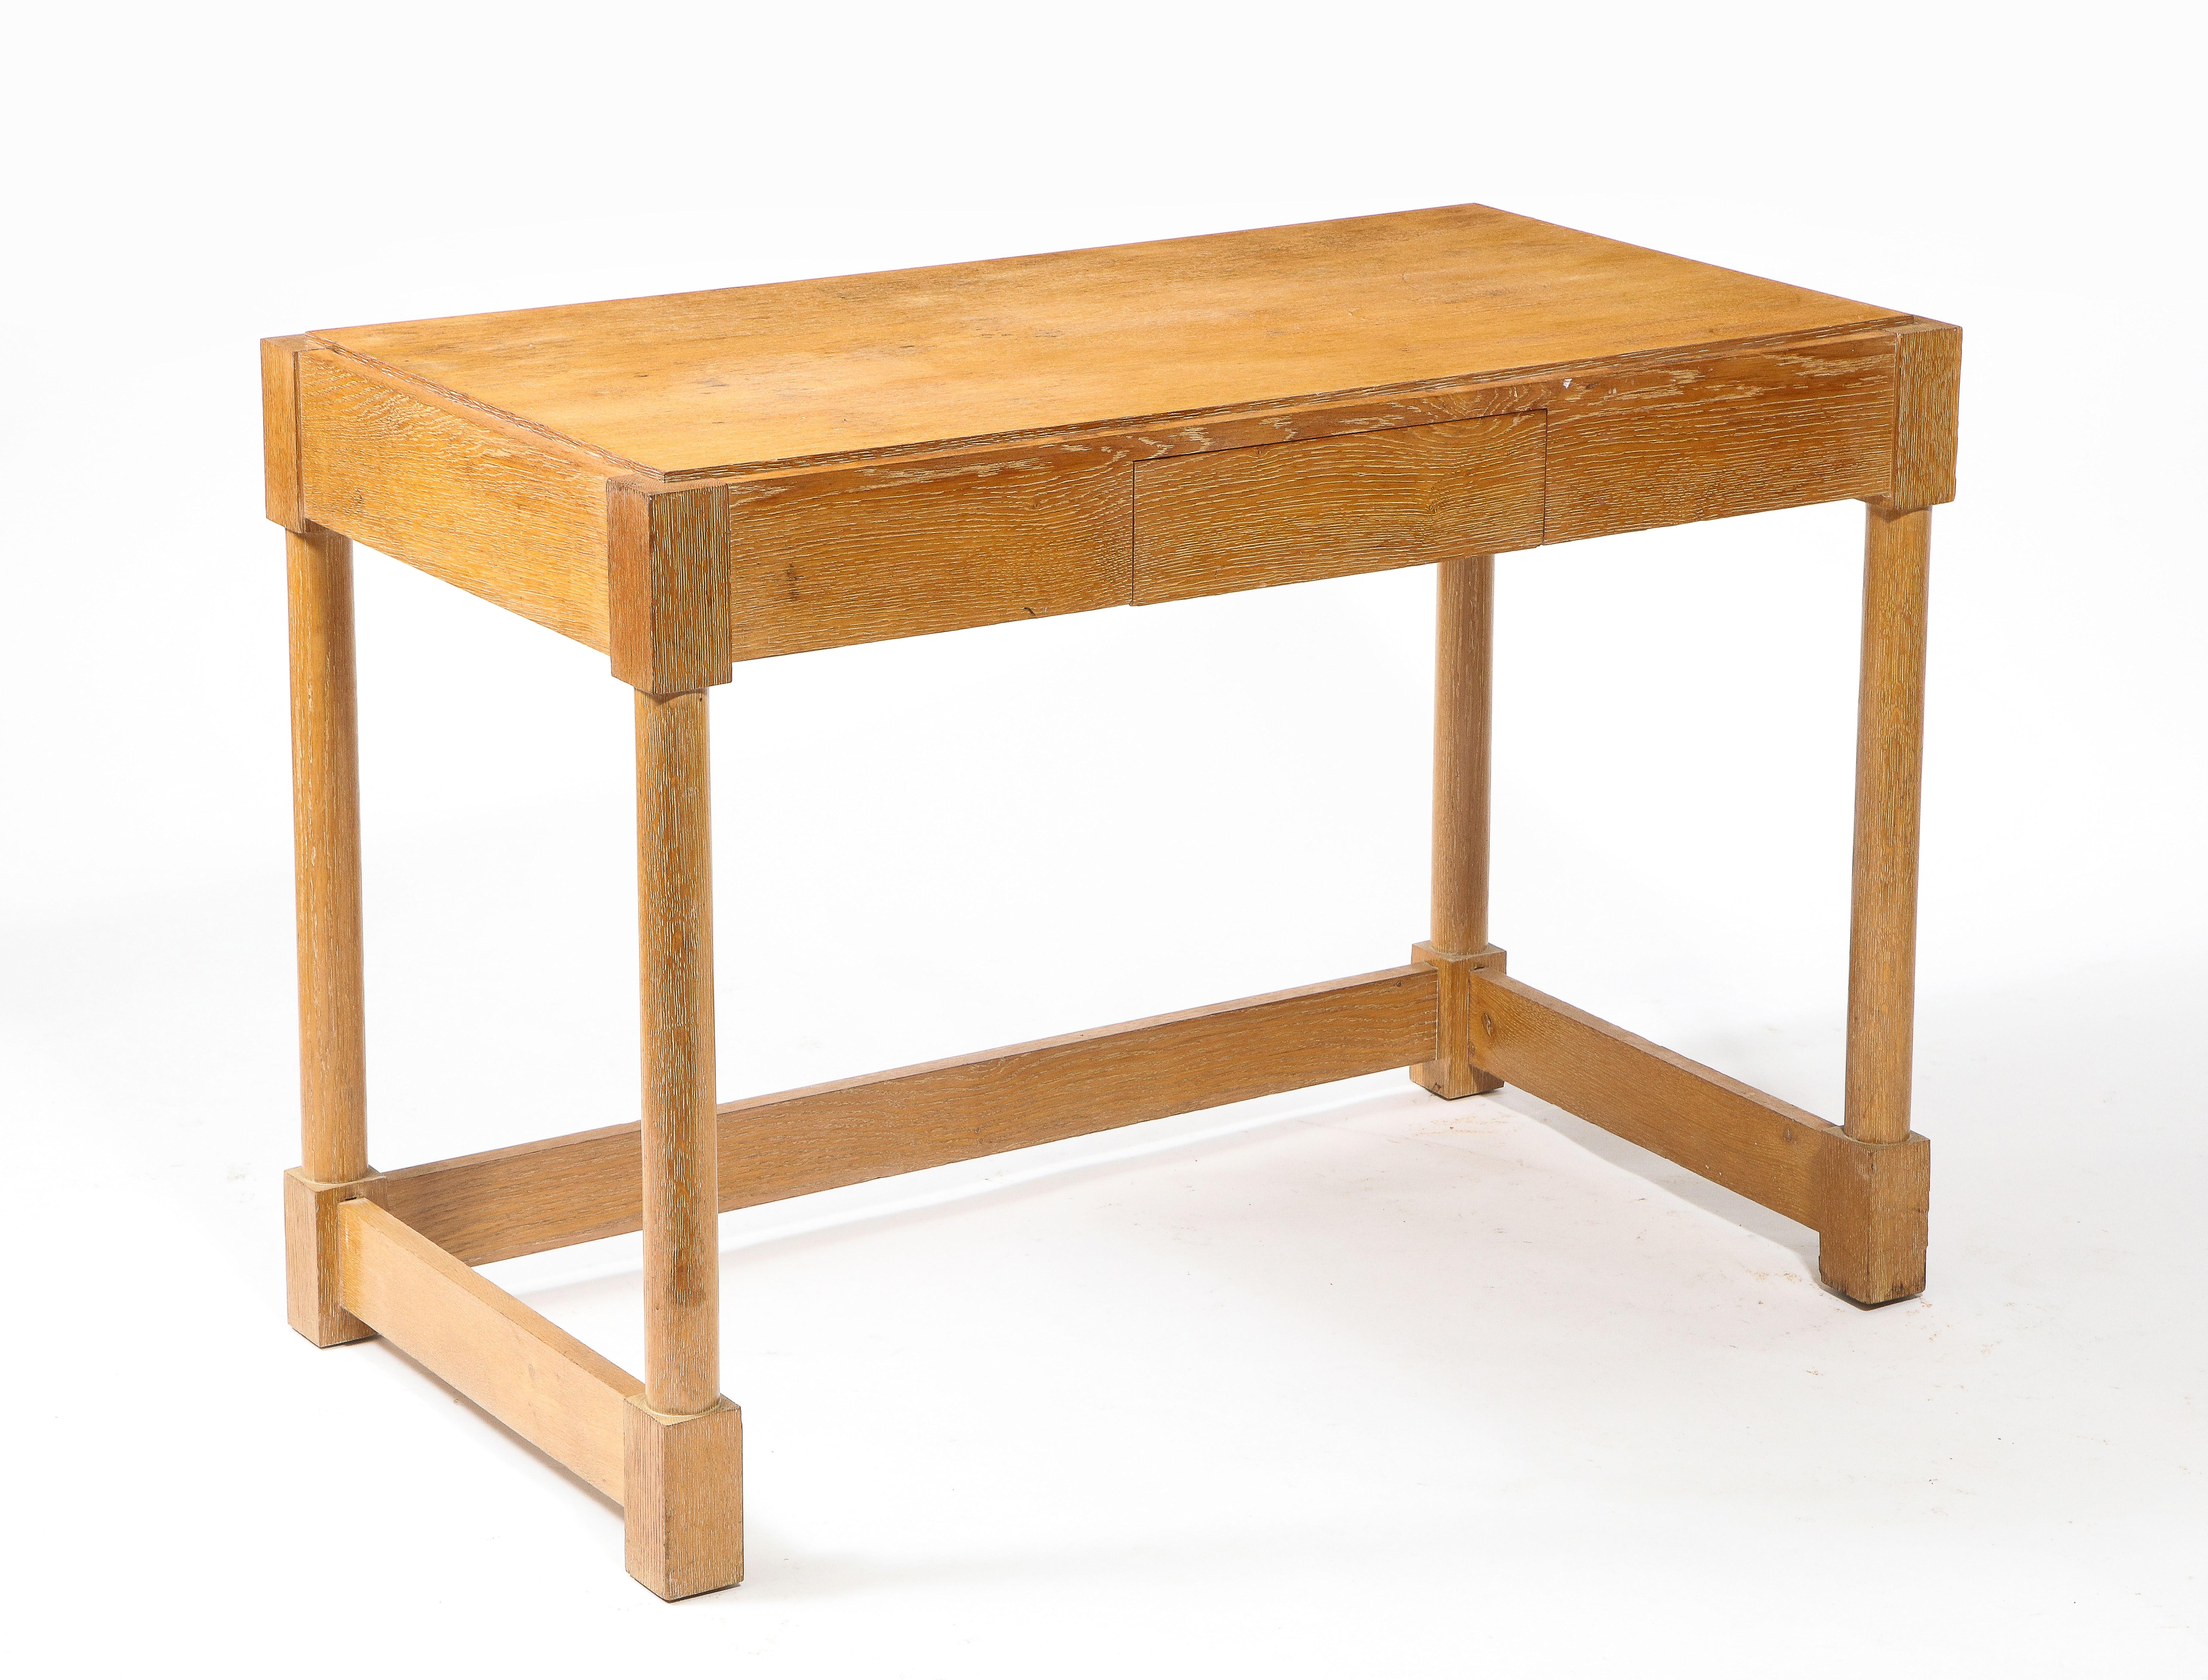 Handsome oak desk with a single drawer by Jacques Adnet.